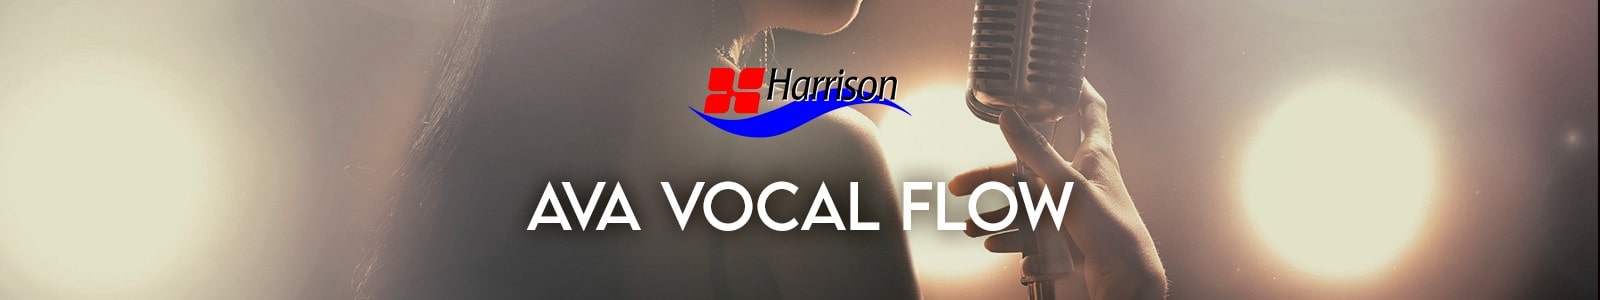 AVA Vocal Flow by Harrison